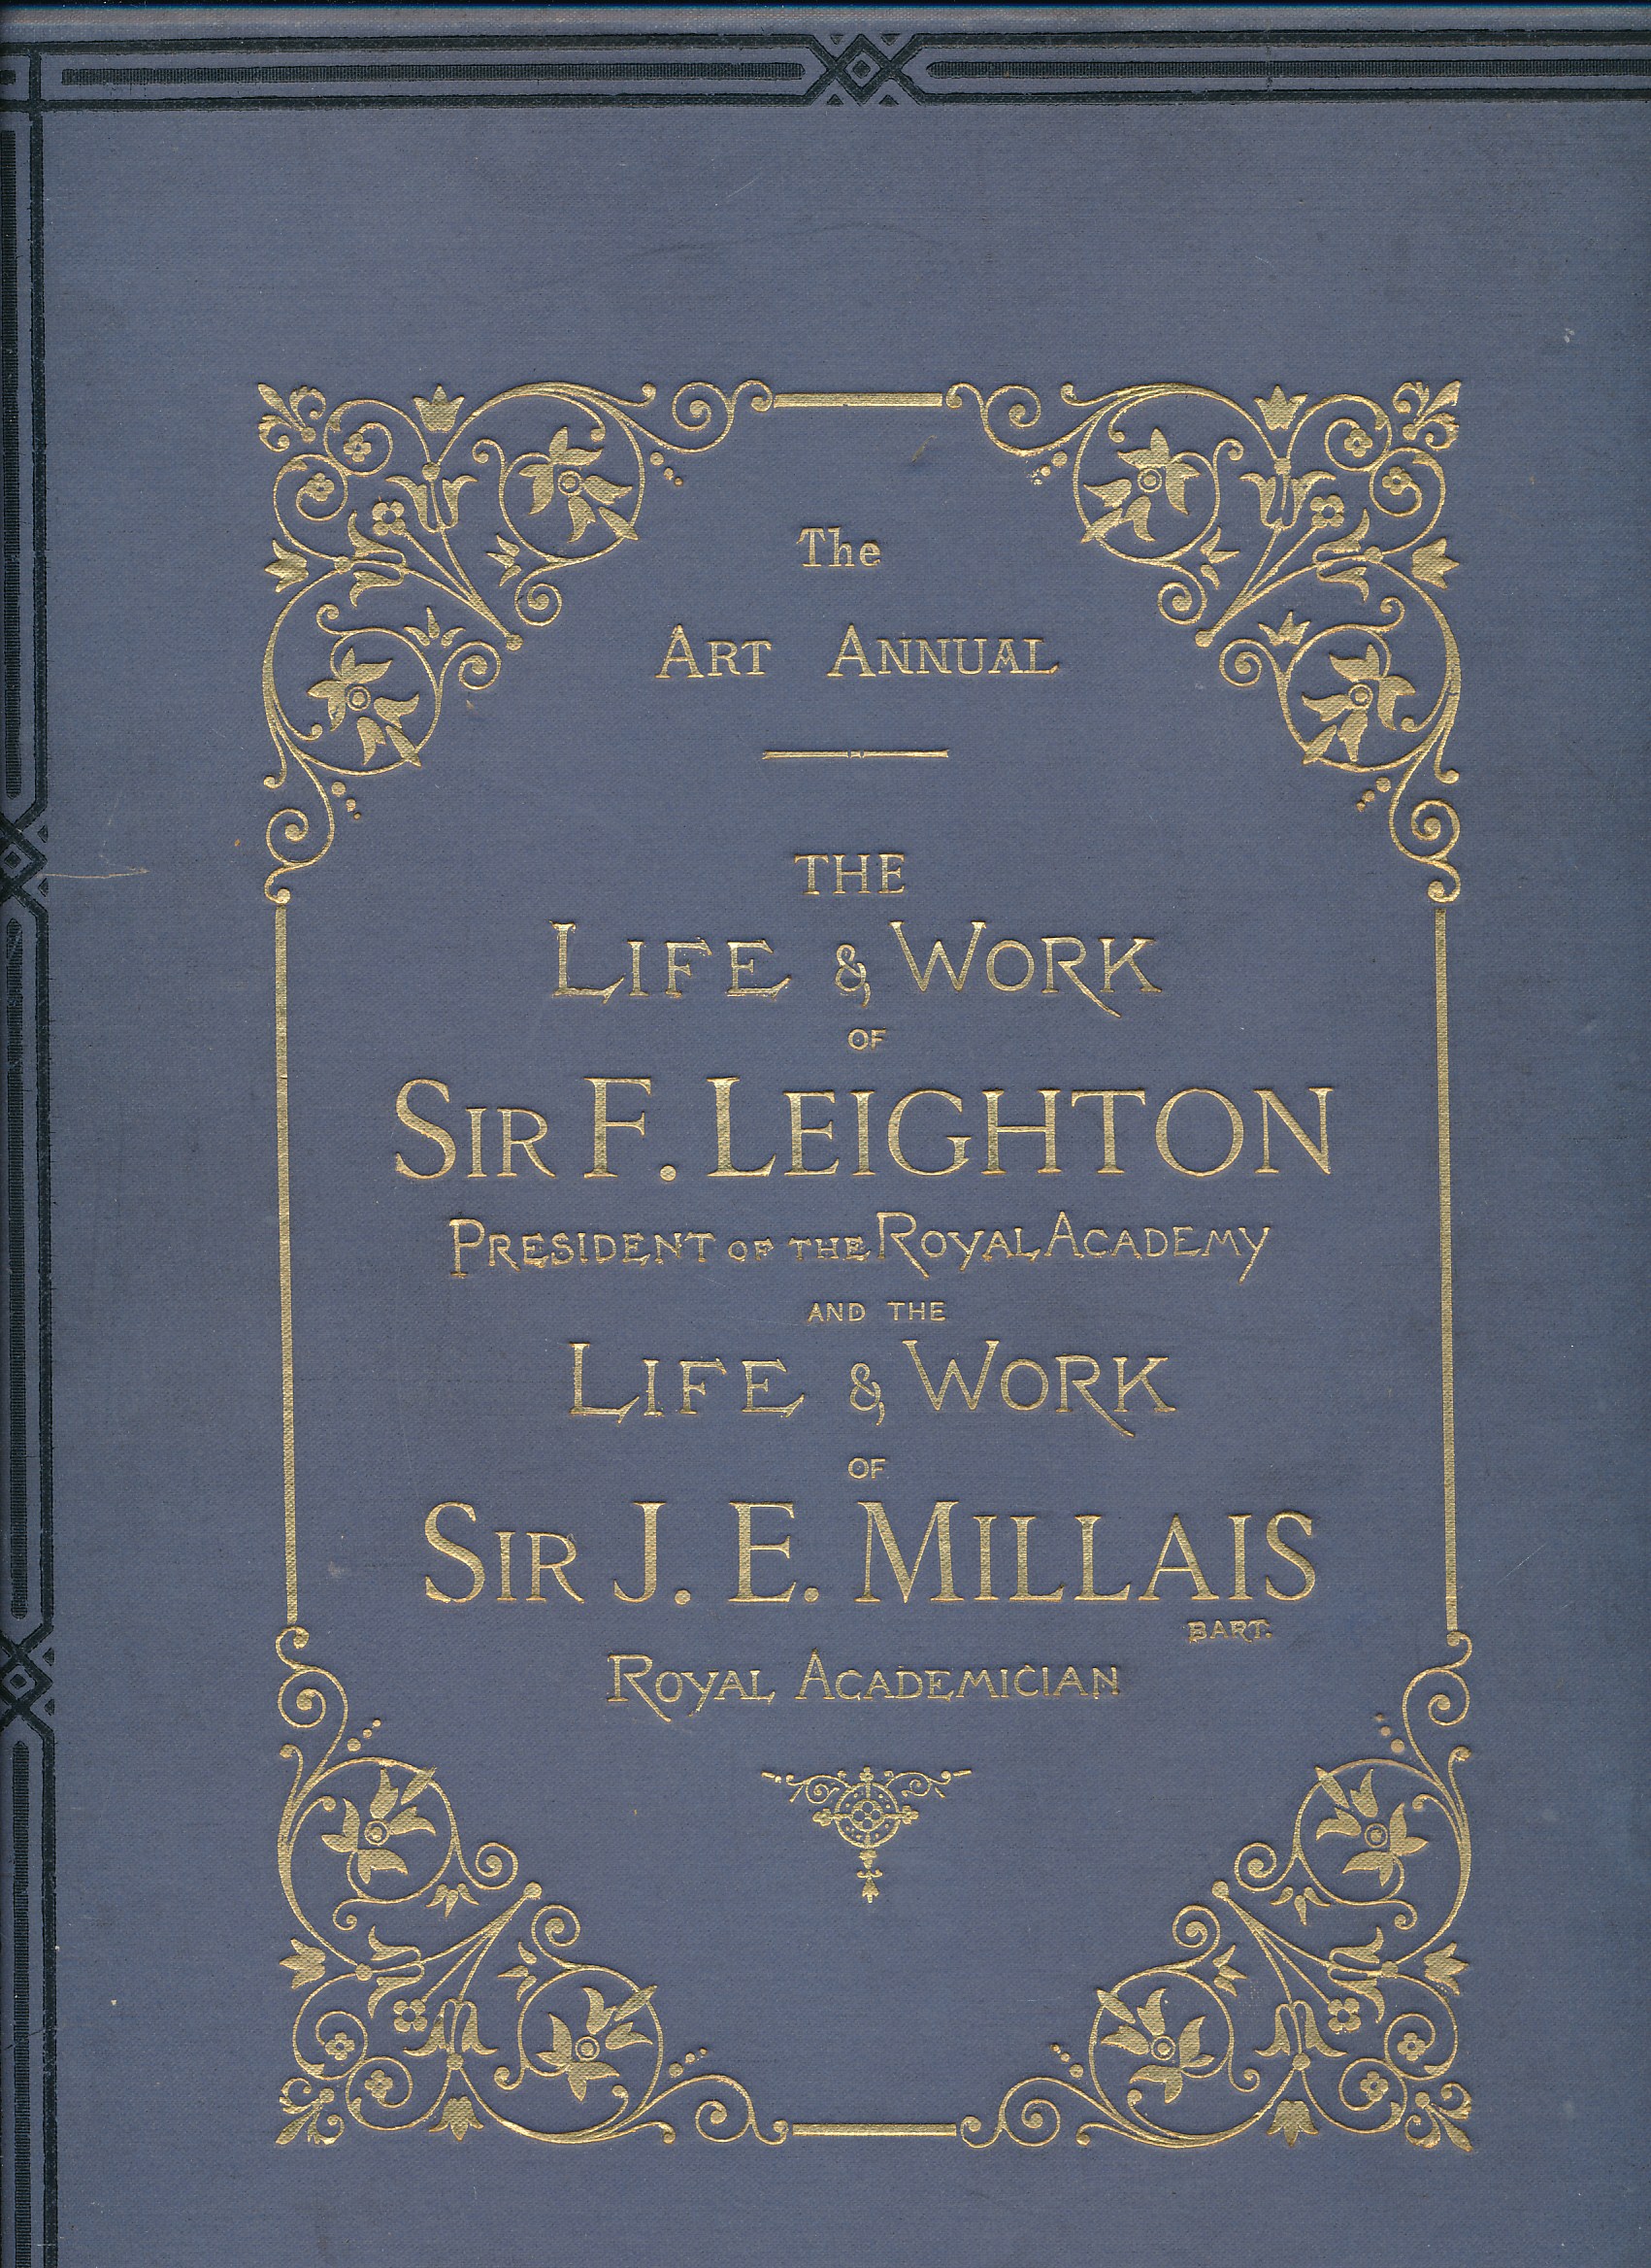 The Art Annual. 1884-1885. The Life and Work of Sir Frederick Leighton and The Life and Work Sir John E Millais. 2 volumes in one.